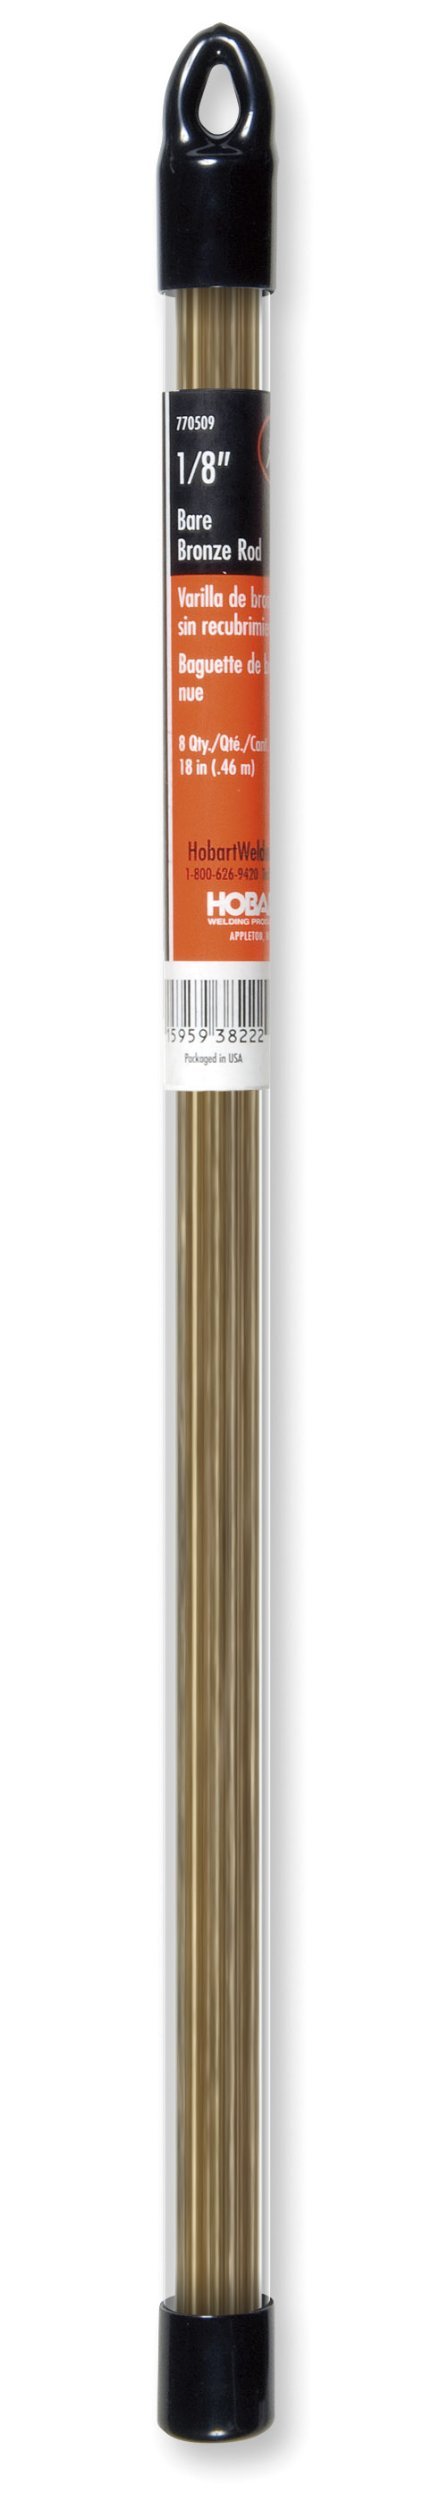  [AUSTRALIA] - Hobart 770509 Low-Fuming Bare Bronze Gas Welding Rods, 1/8-by-18-Inch